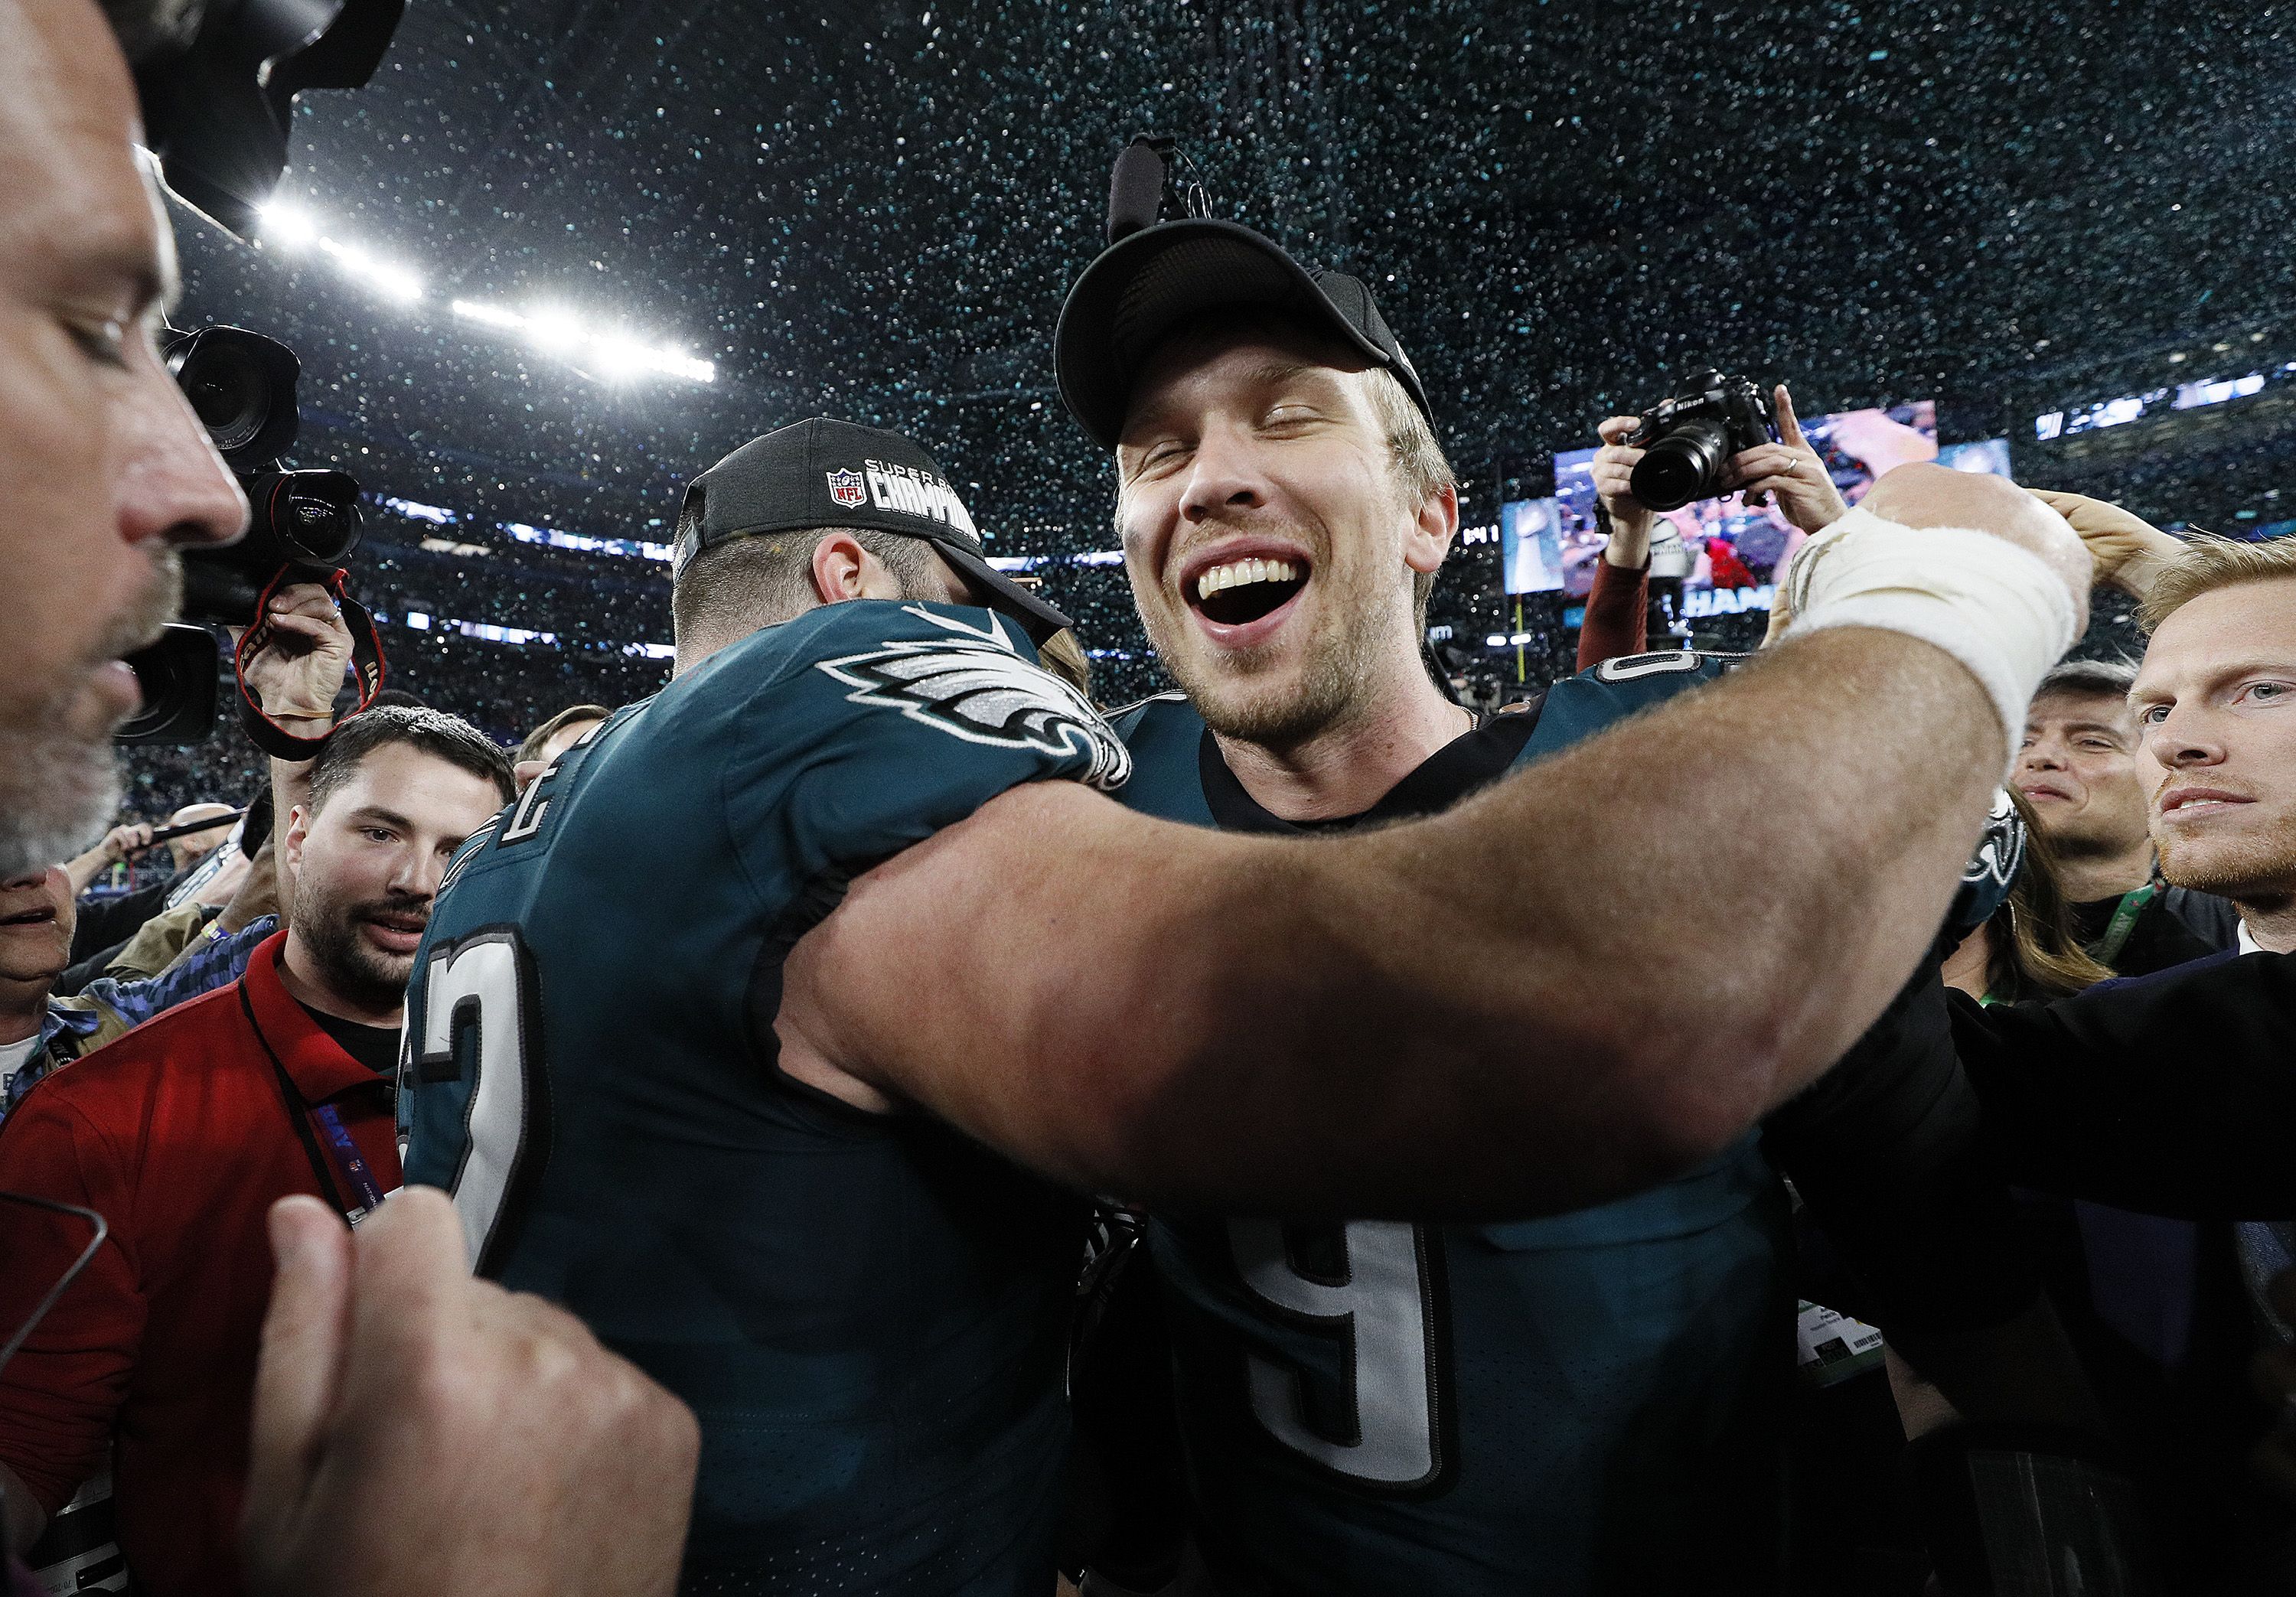 Philadelphia Eagles quarterback Nick Foles (9) joins teammates in celebrating their victory over the New England Patriots in Super Bowl LII. Photo by Carlos Gonzalez of the Minneapolis Star Tribune.